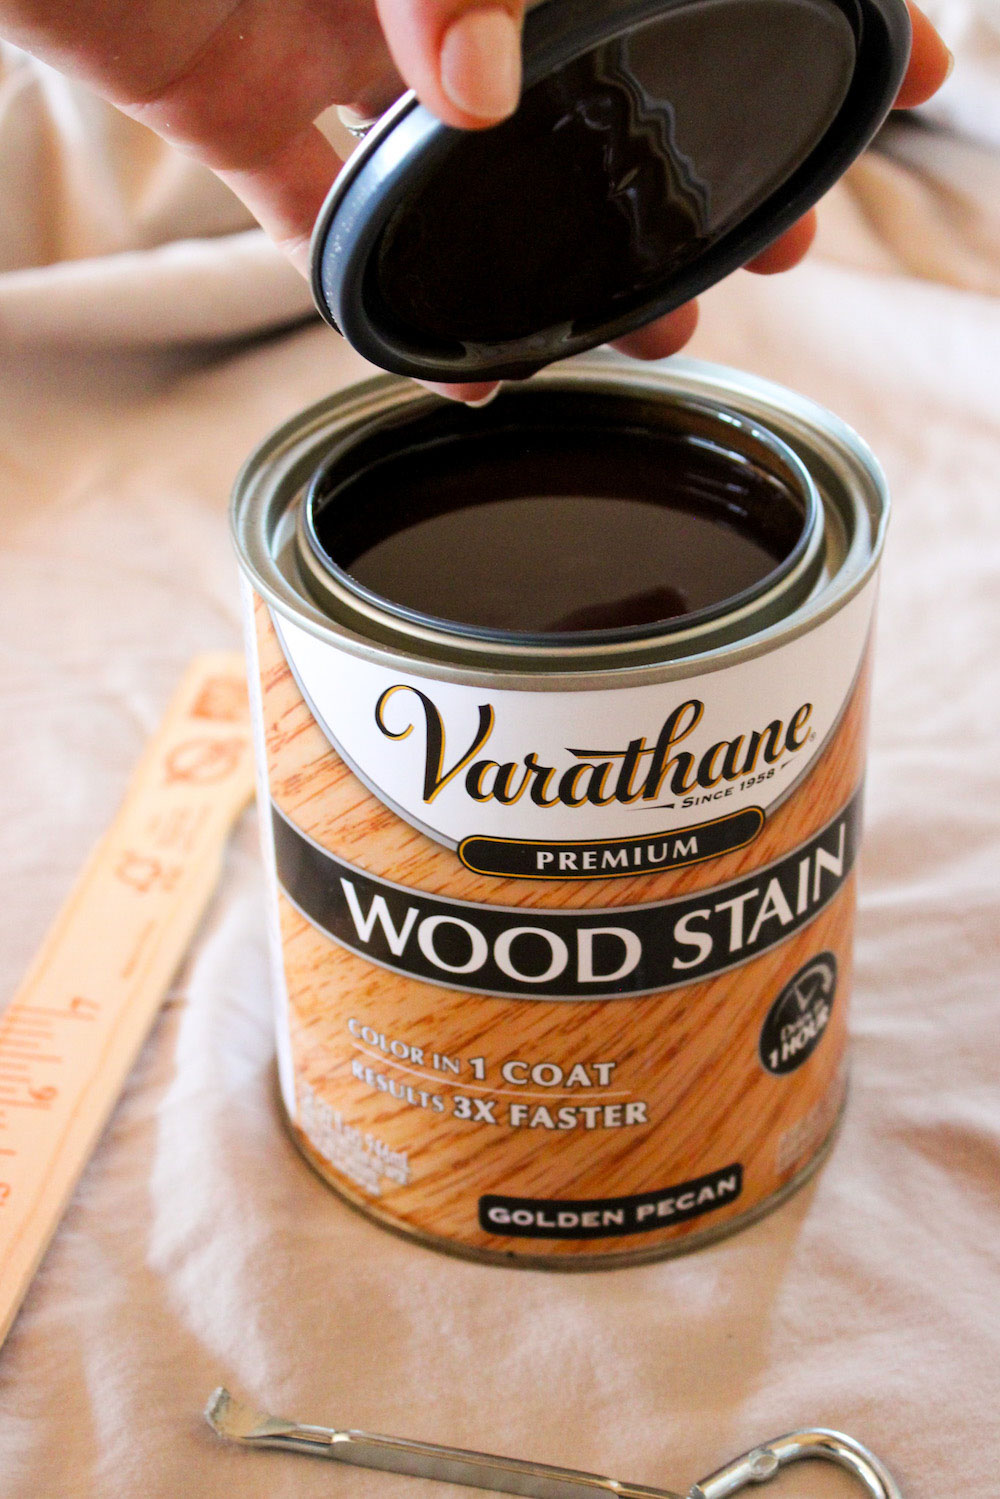 A person opens the top of a can of Varathane premium wood stain.